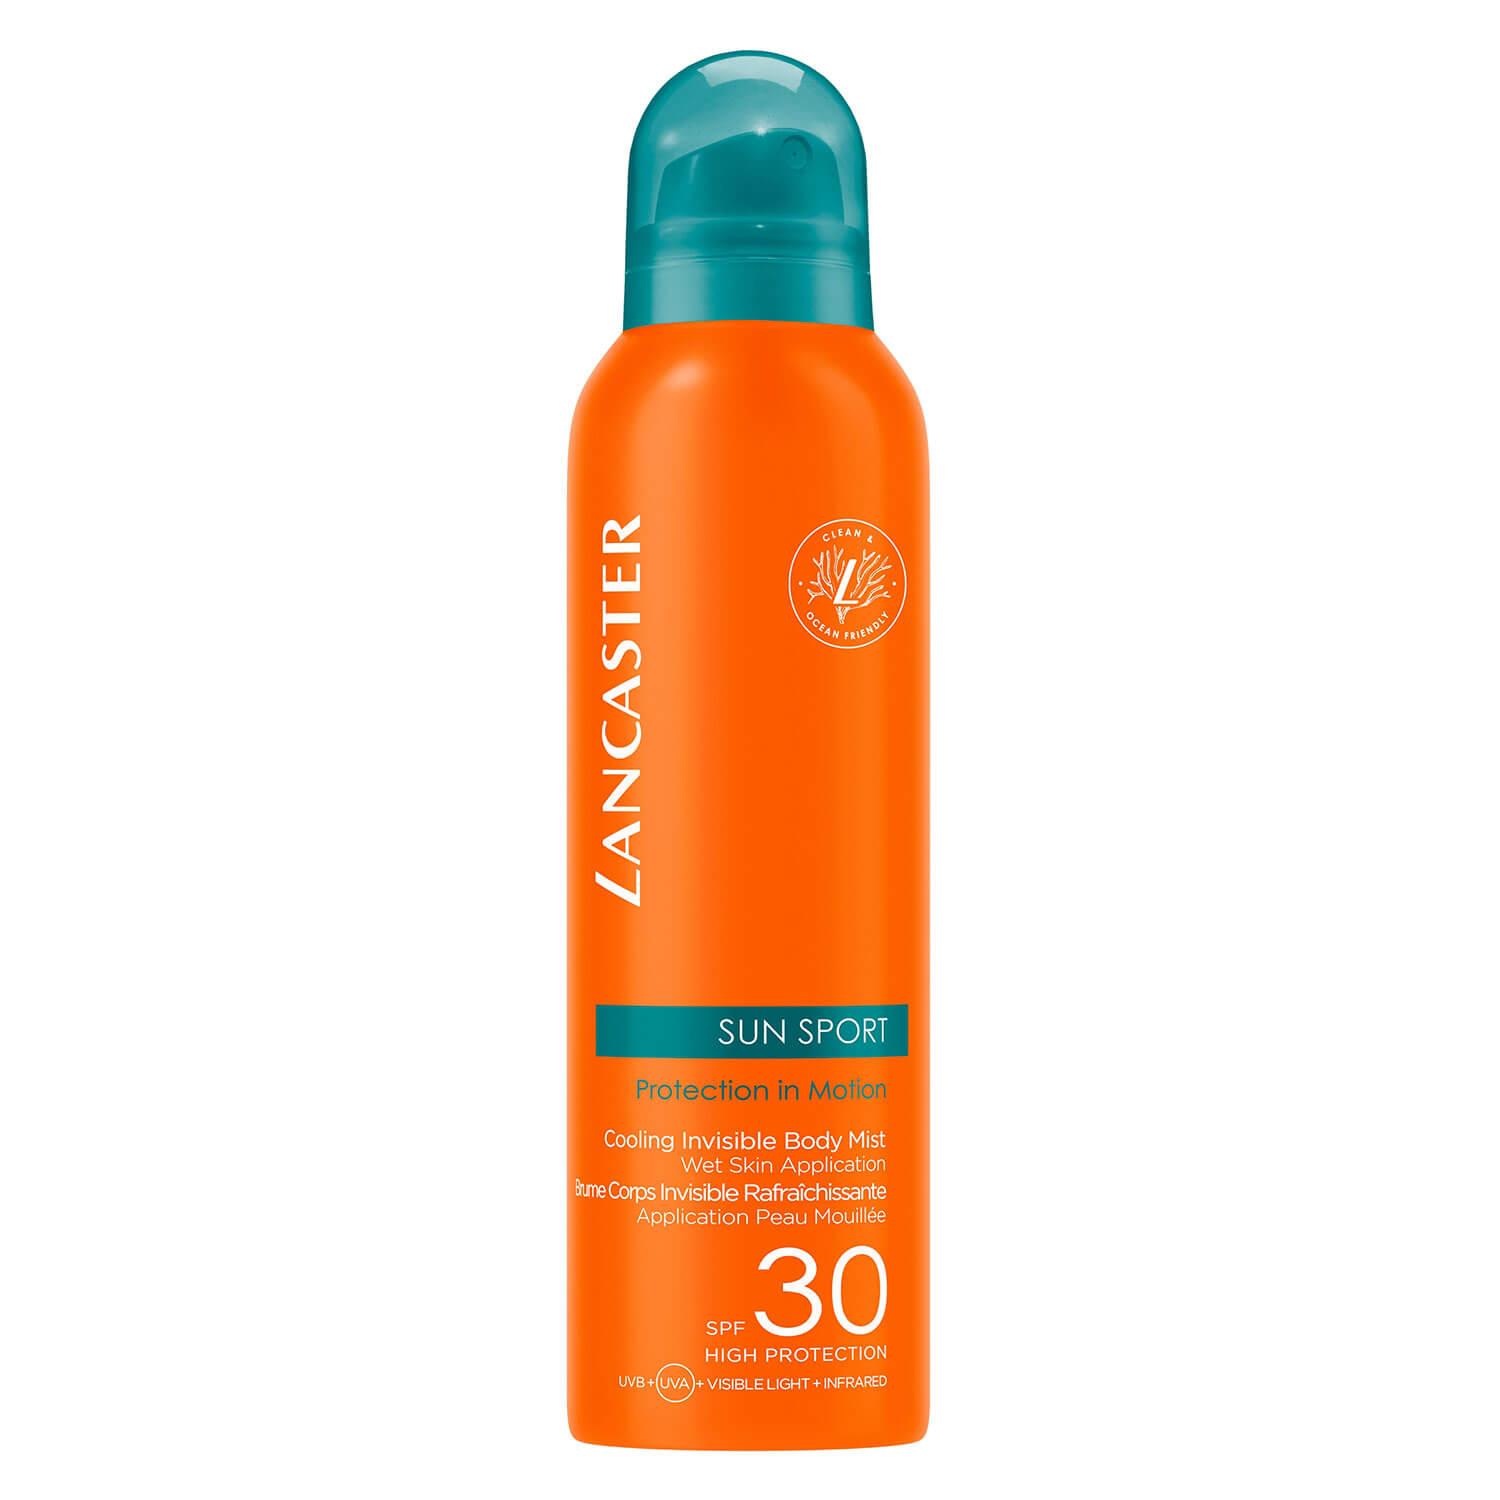 Sun Sport - Cooling Invisible Body Mist SPF30